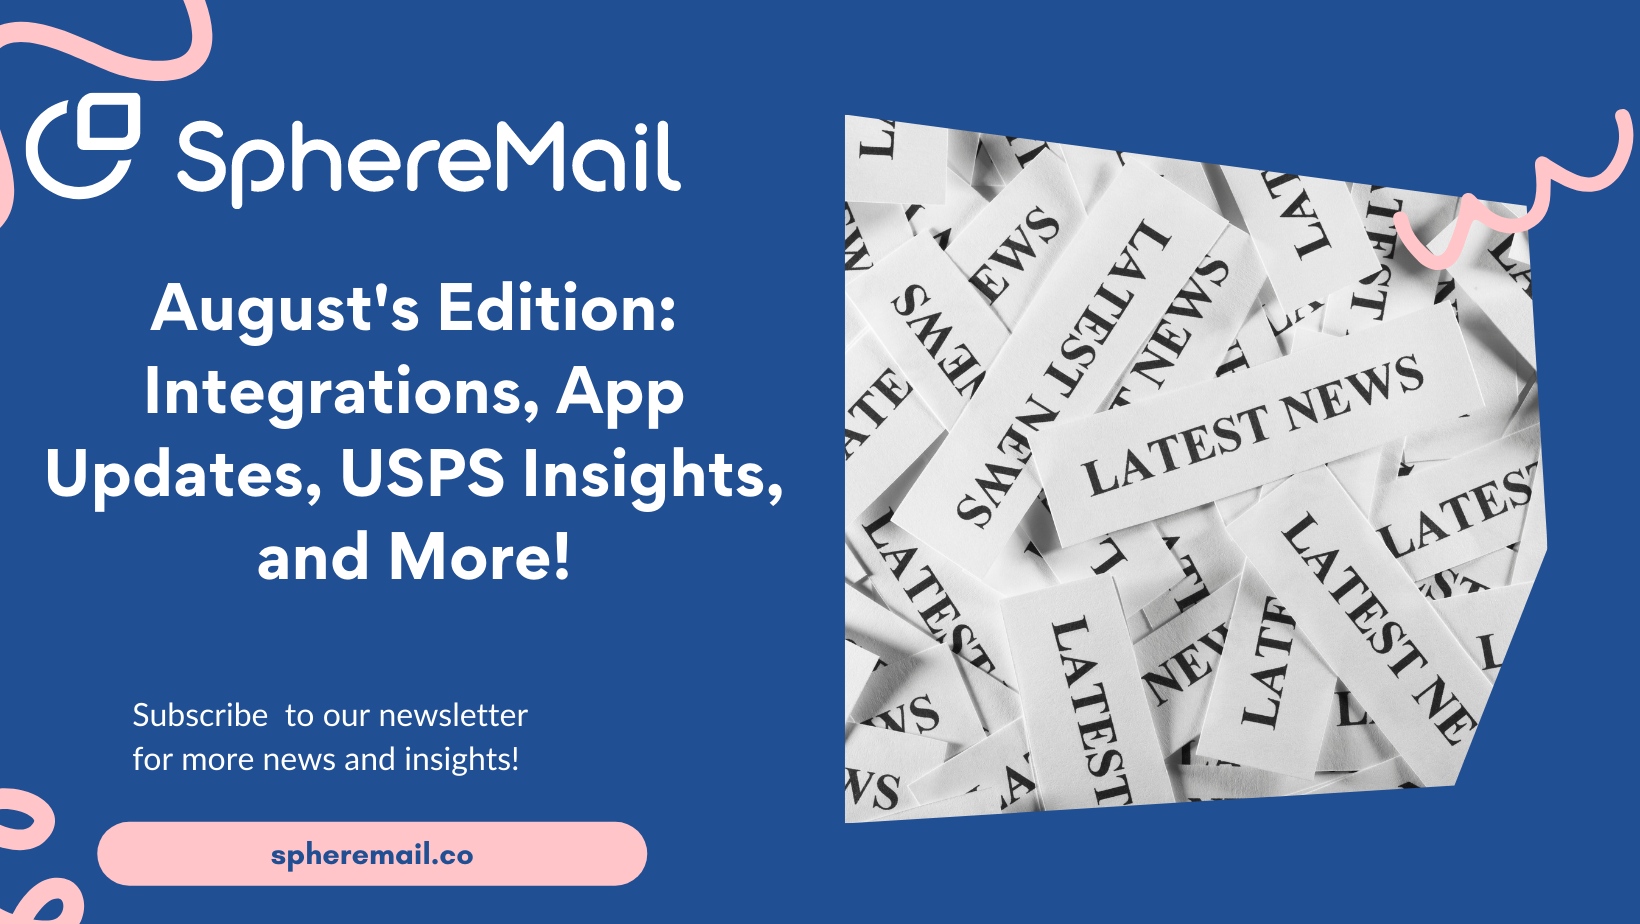 spheremail.co (9)